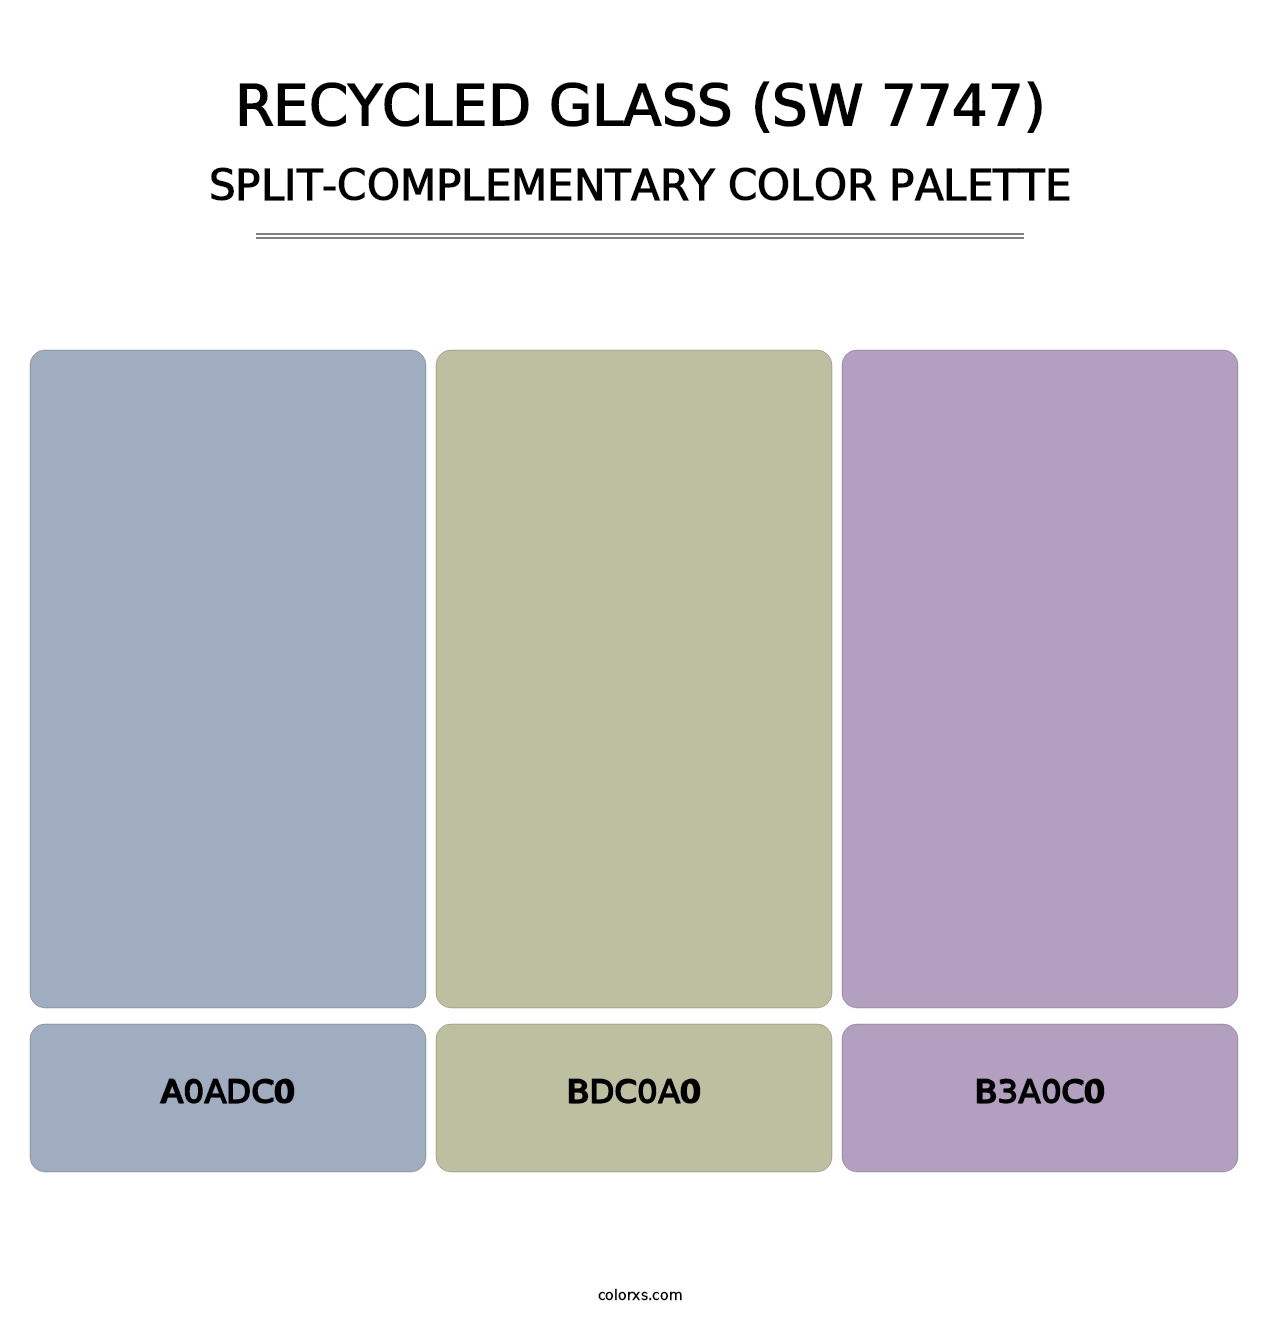 Recycled Glass (SW 7747) - Split-Complementary Color Palette